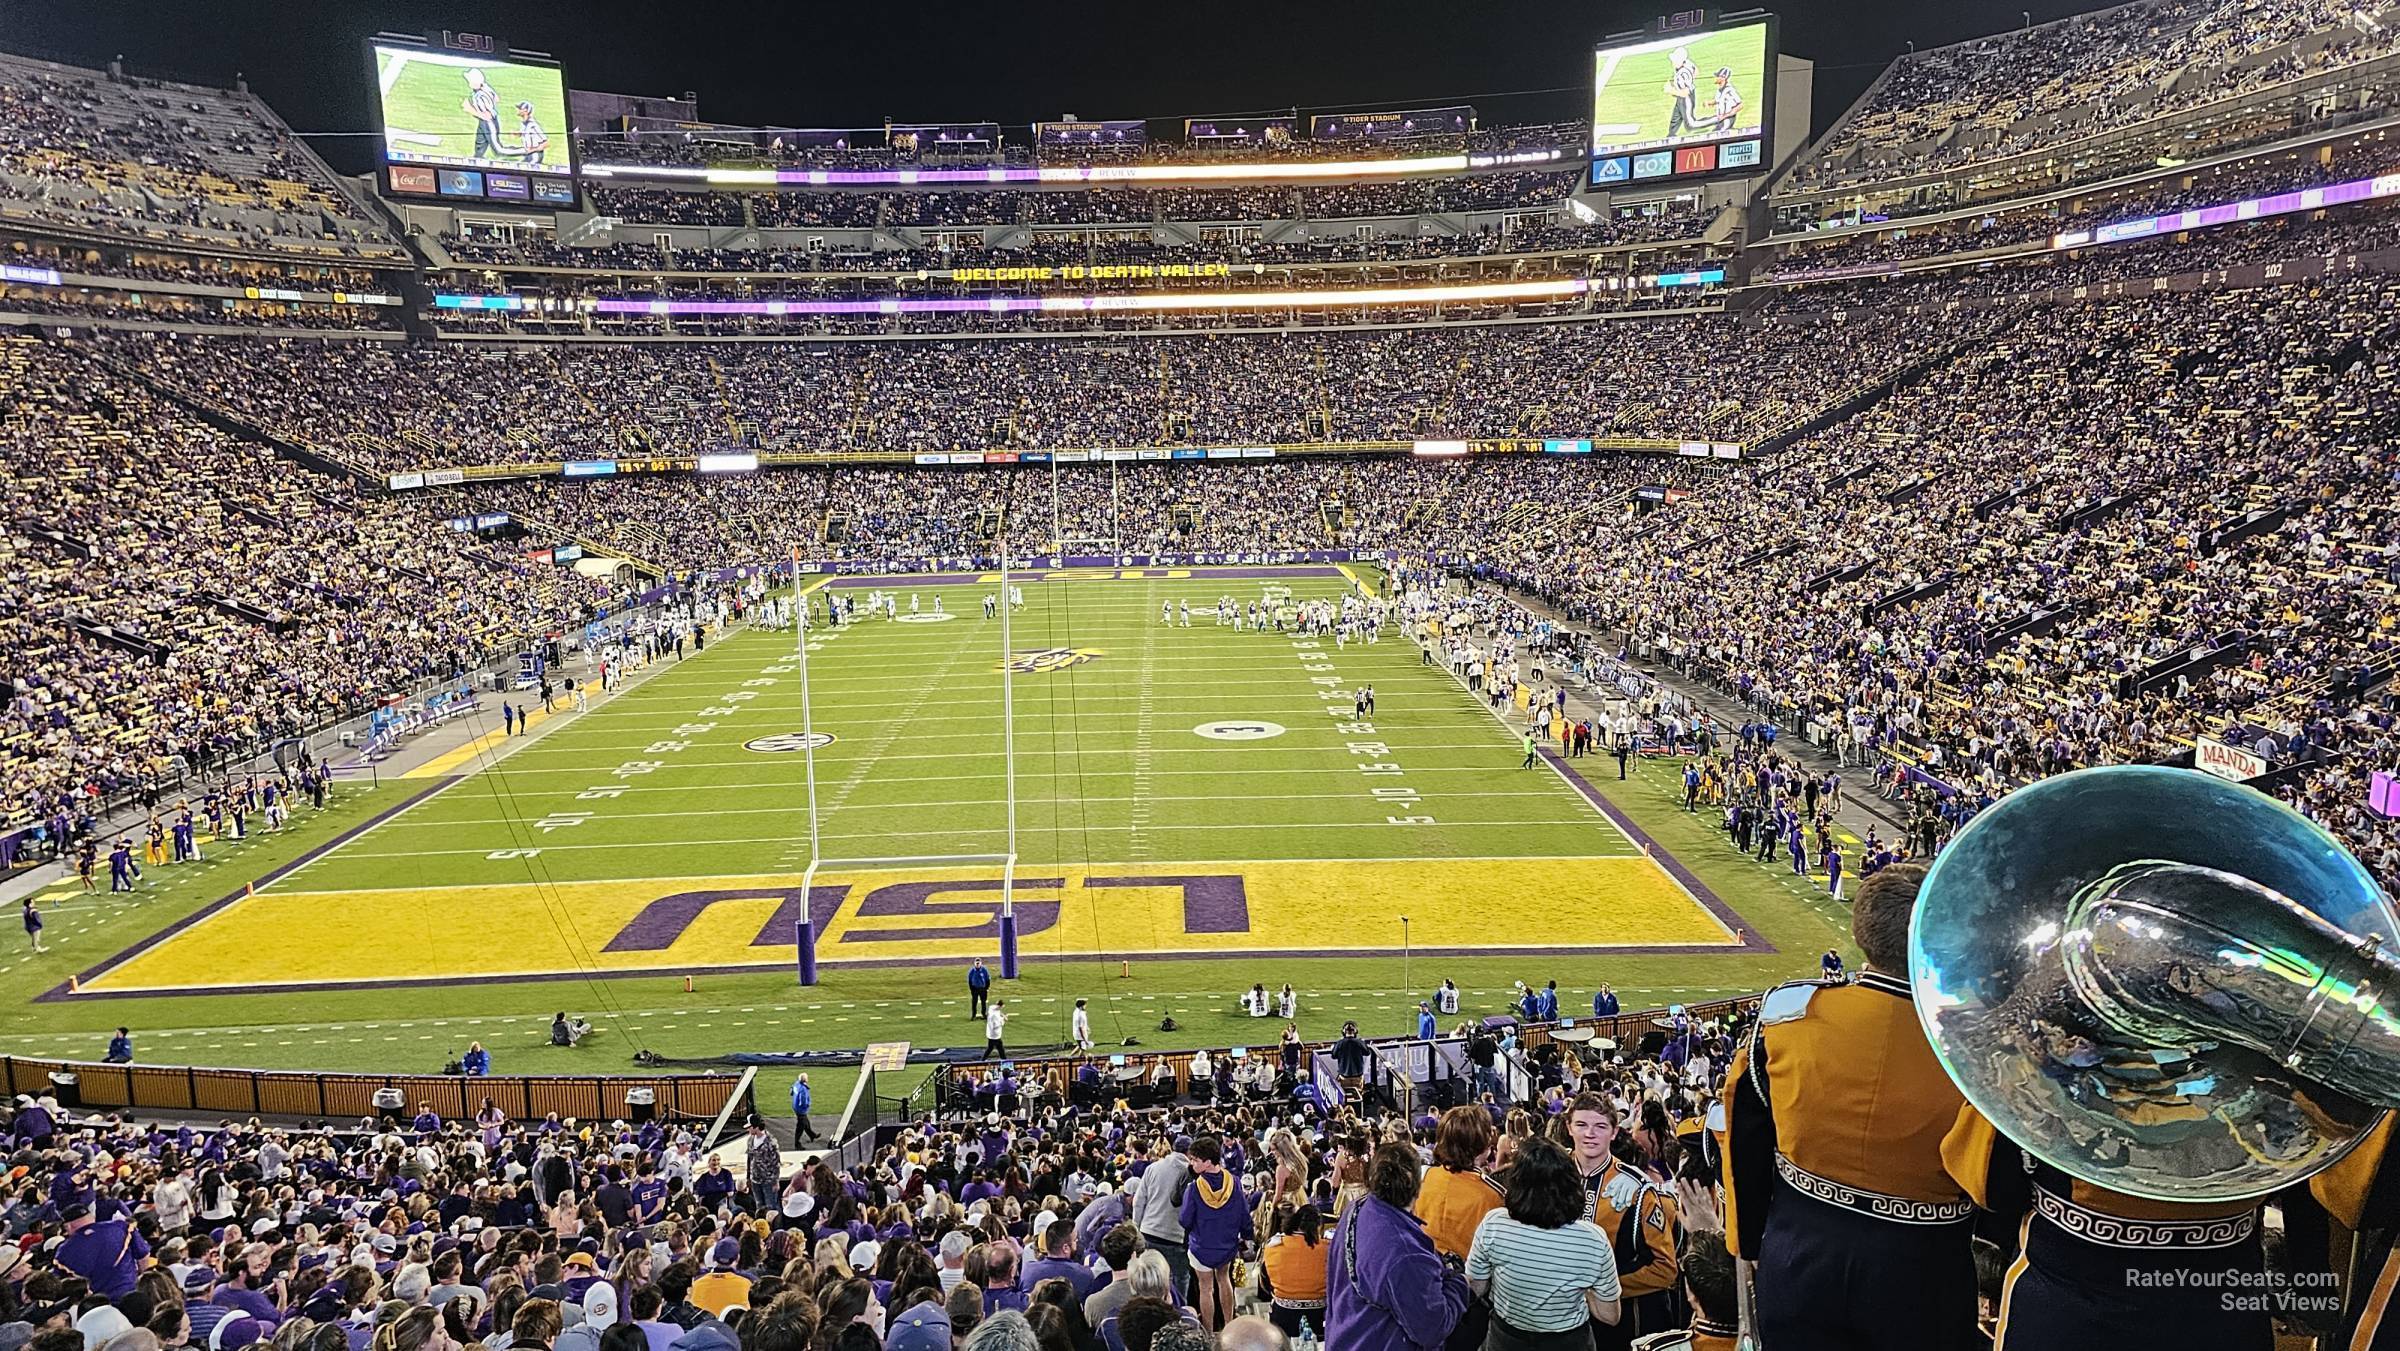 section 232, row 1 seat view  - tiger stadium